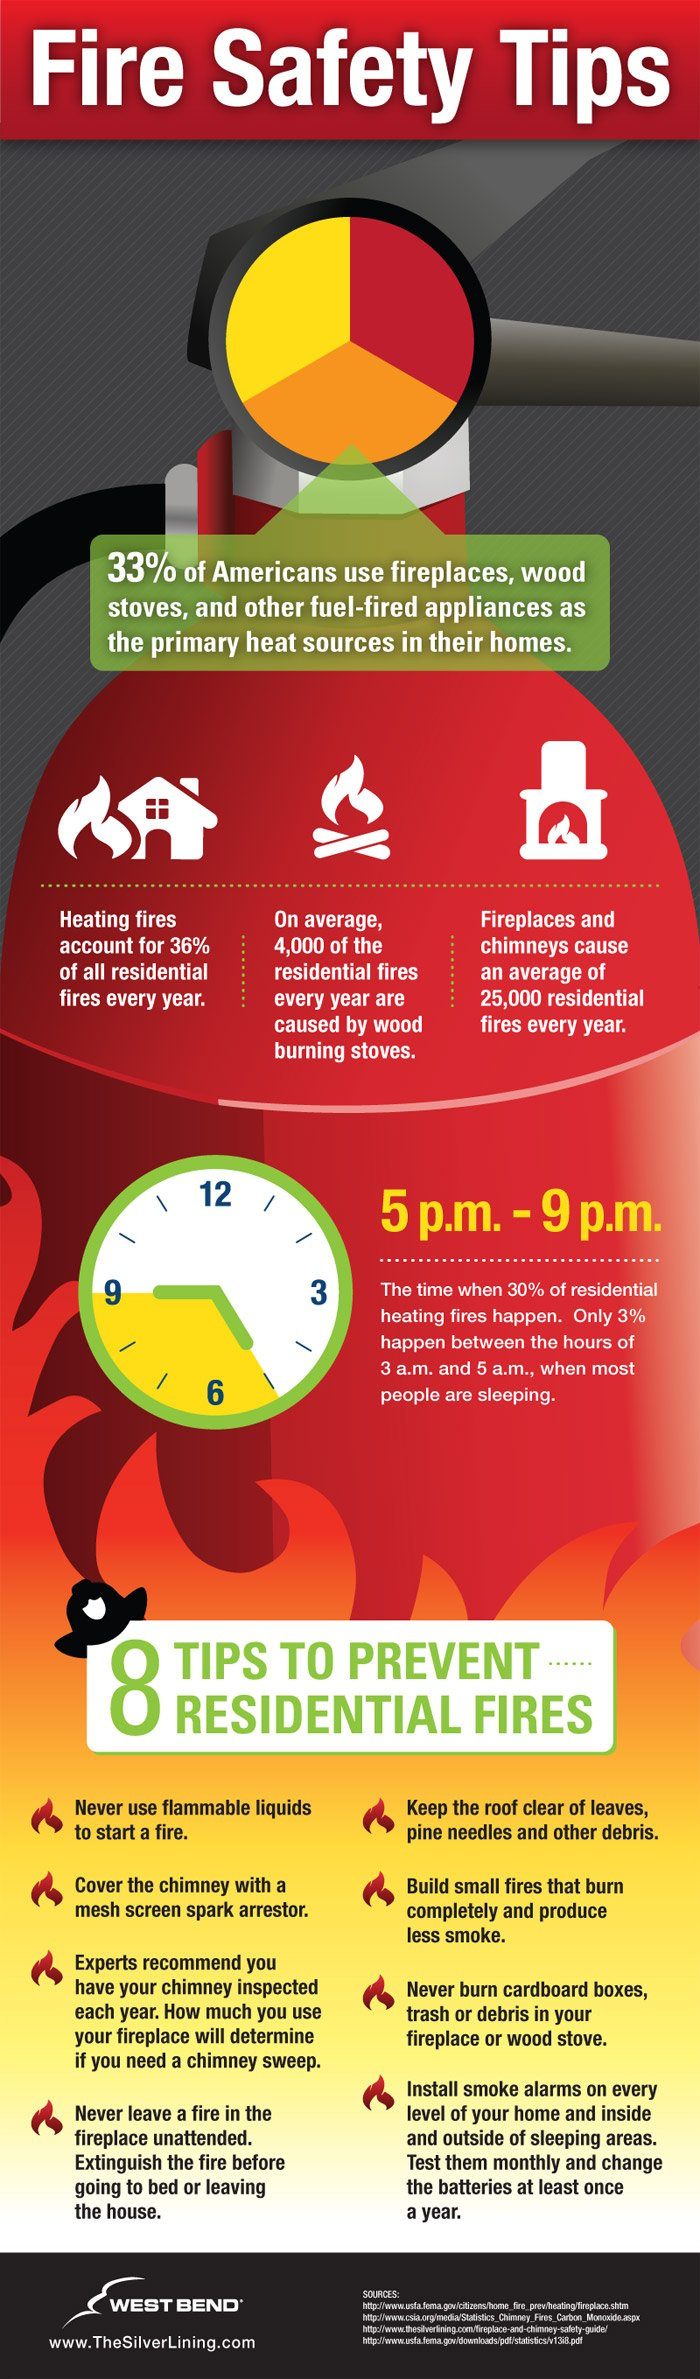 Fire Safety Tips Infographic